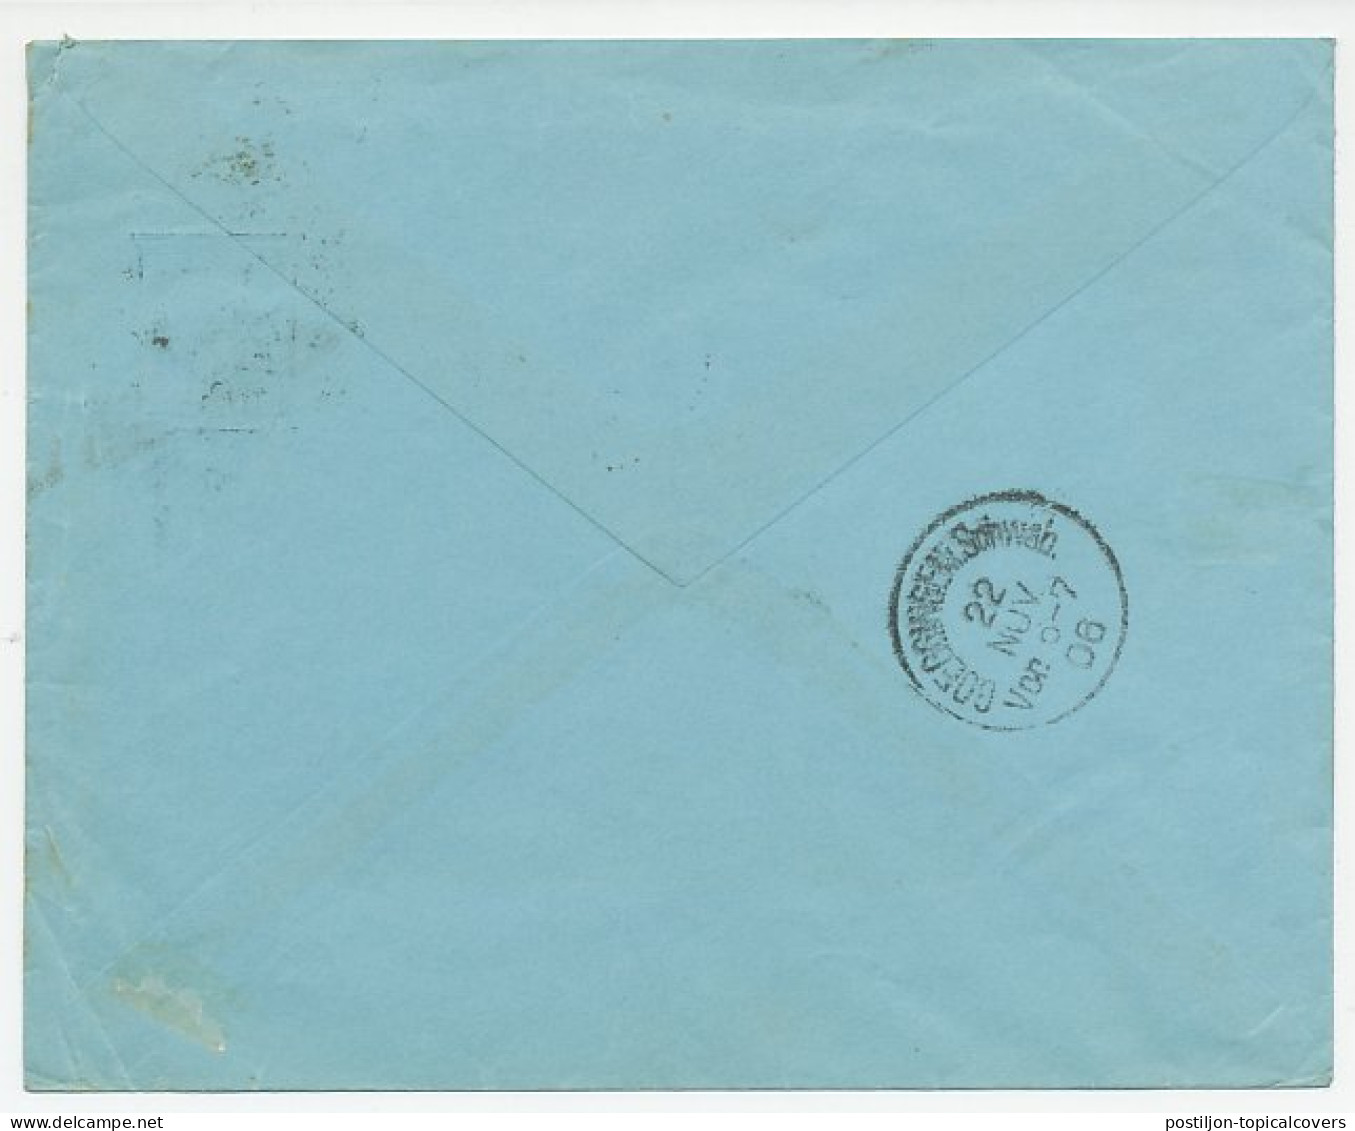 Postal Stationery Austria 1906 - Privately Printed Machine And Metal Goods Factory - Fabbriche E Imprese